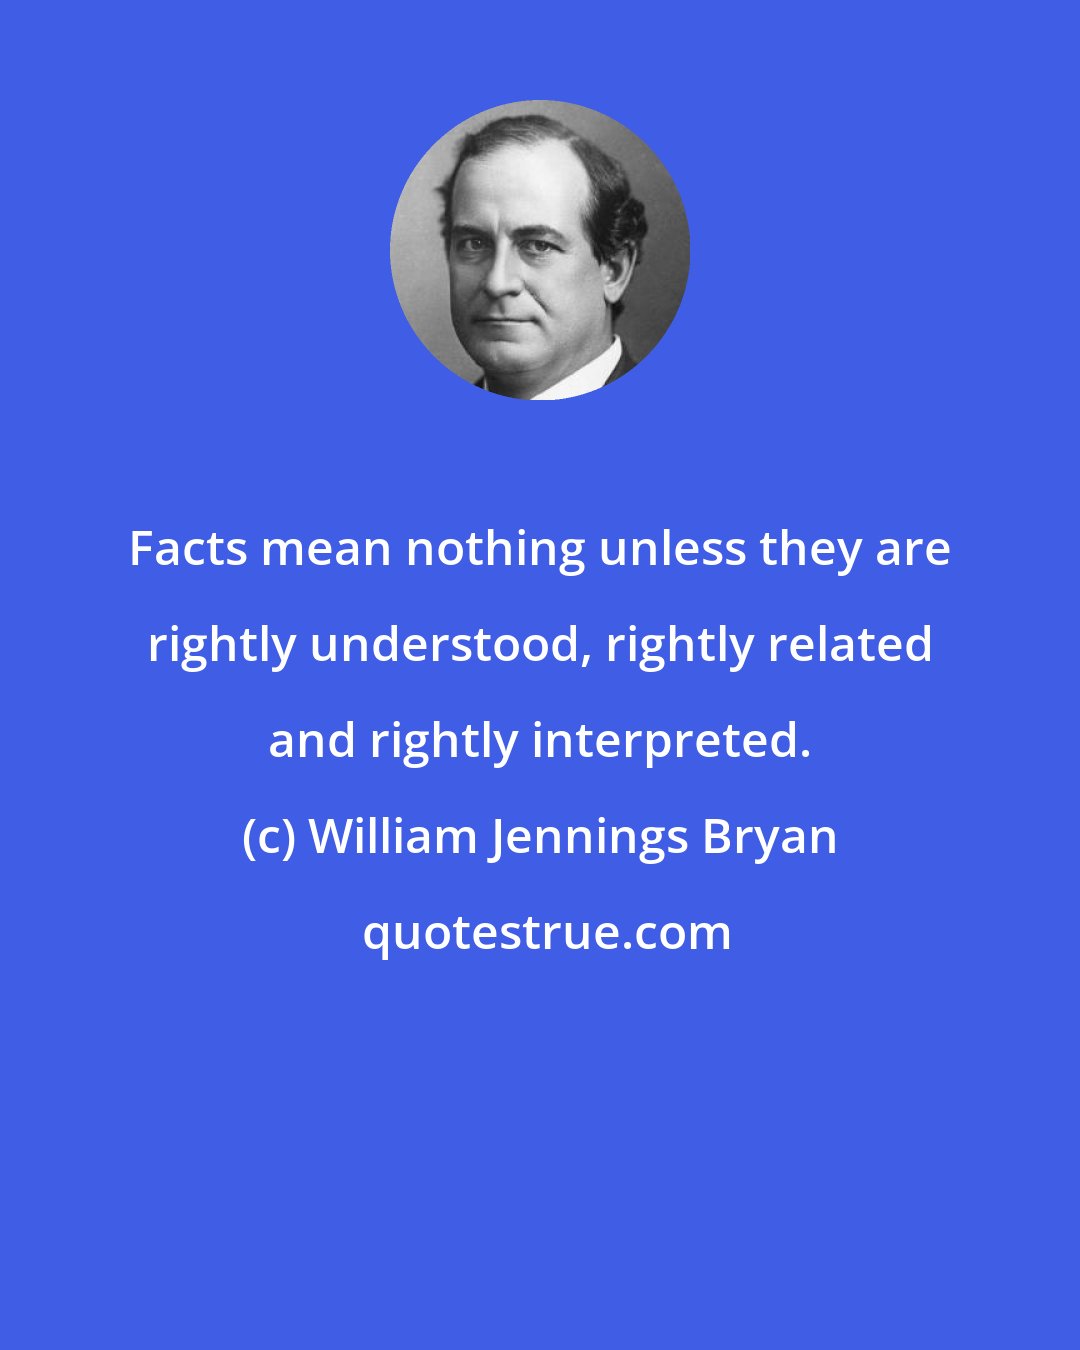 William Jennings Bryan: Facts mean nothing unless they are rightly understood, rightly related and rightly interpreted.